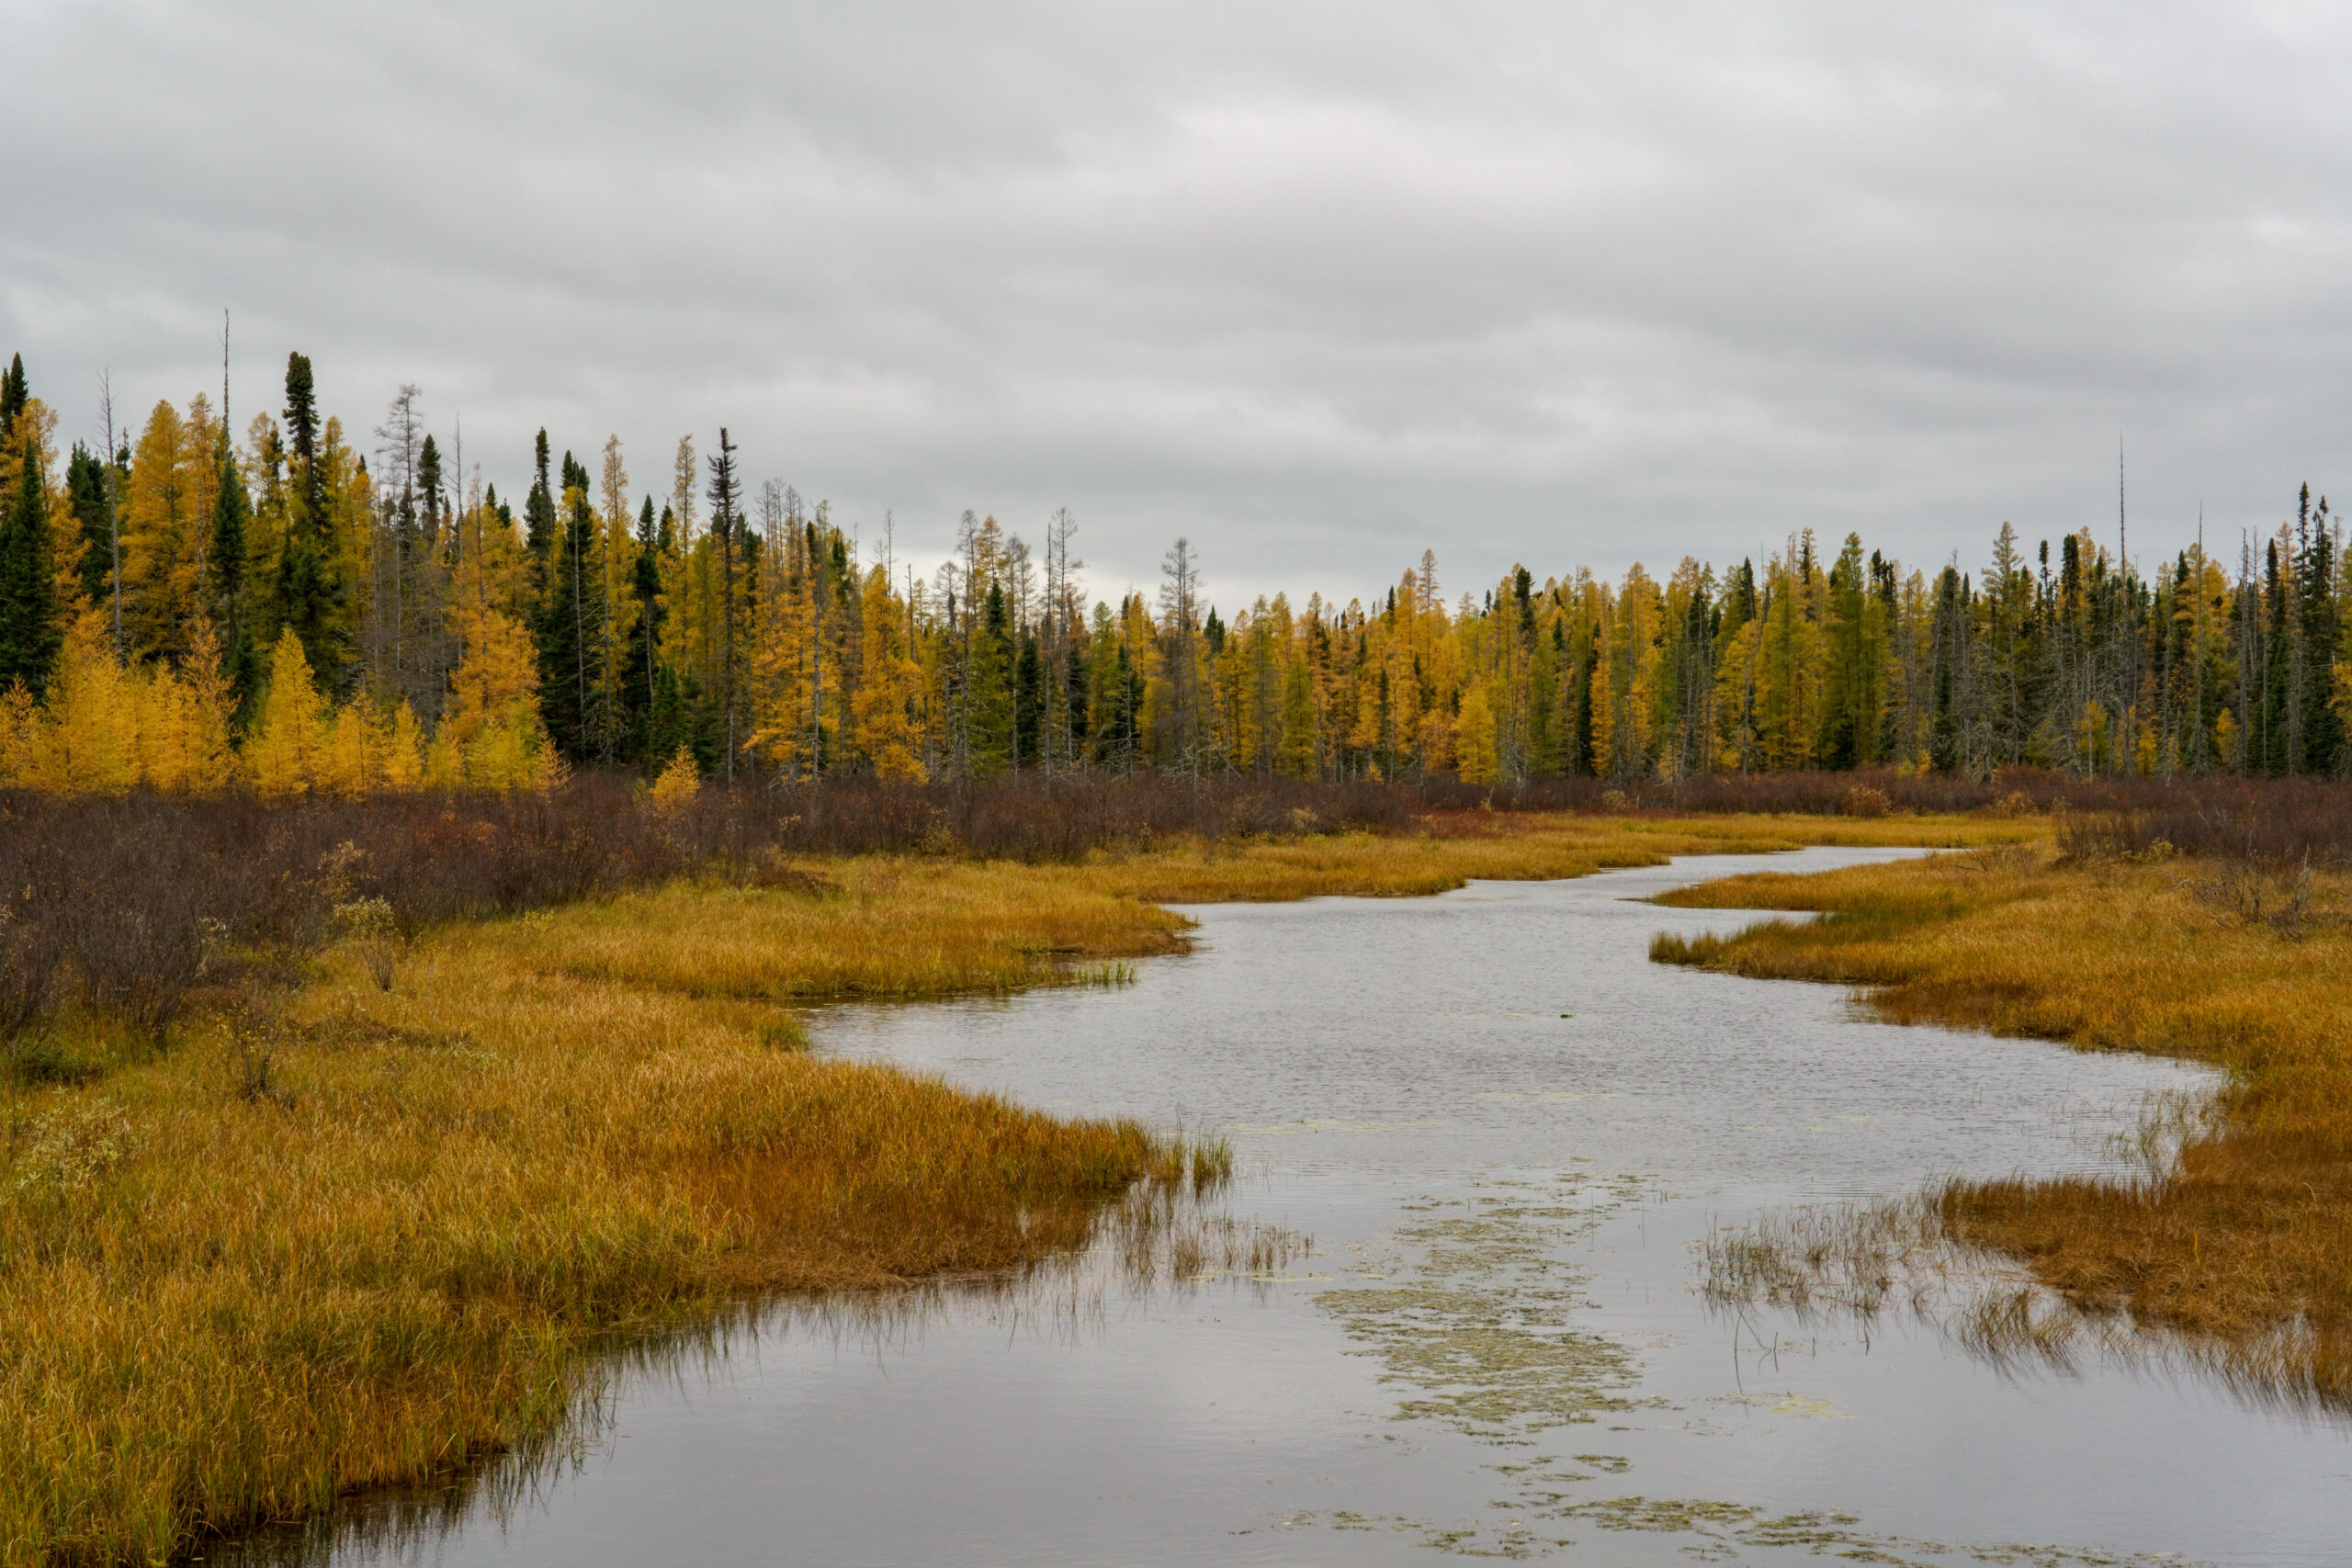 A river surrounded by golden larch trees under a gloomy sky on Treaty 9 territory in Ontario.